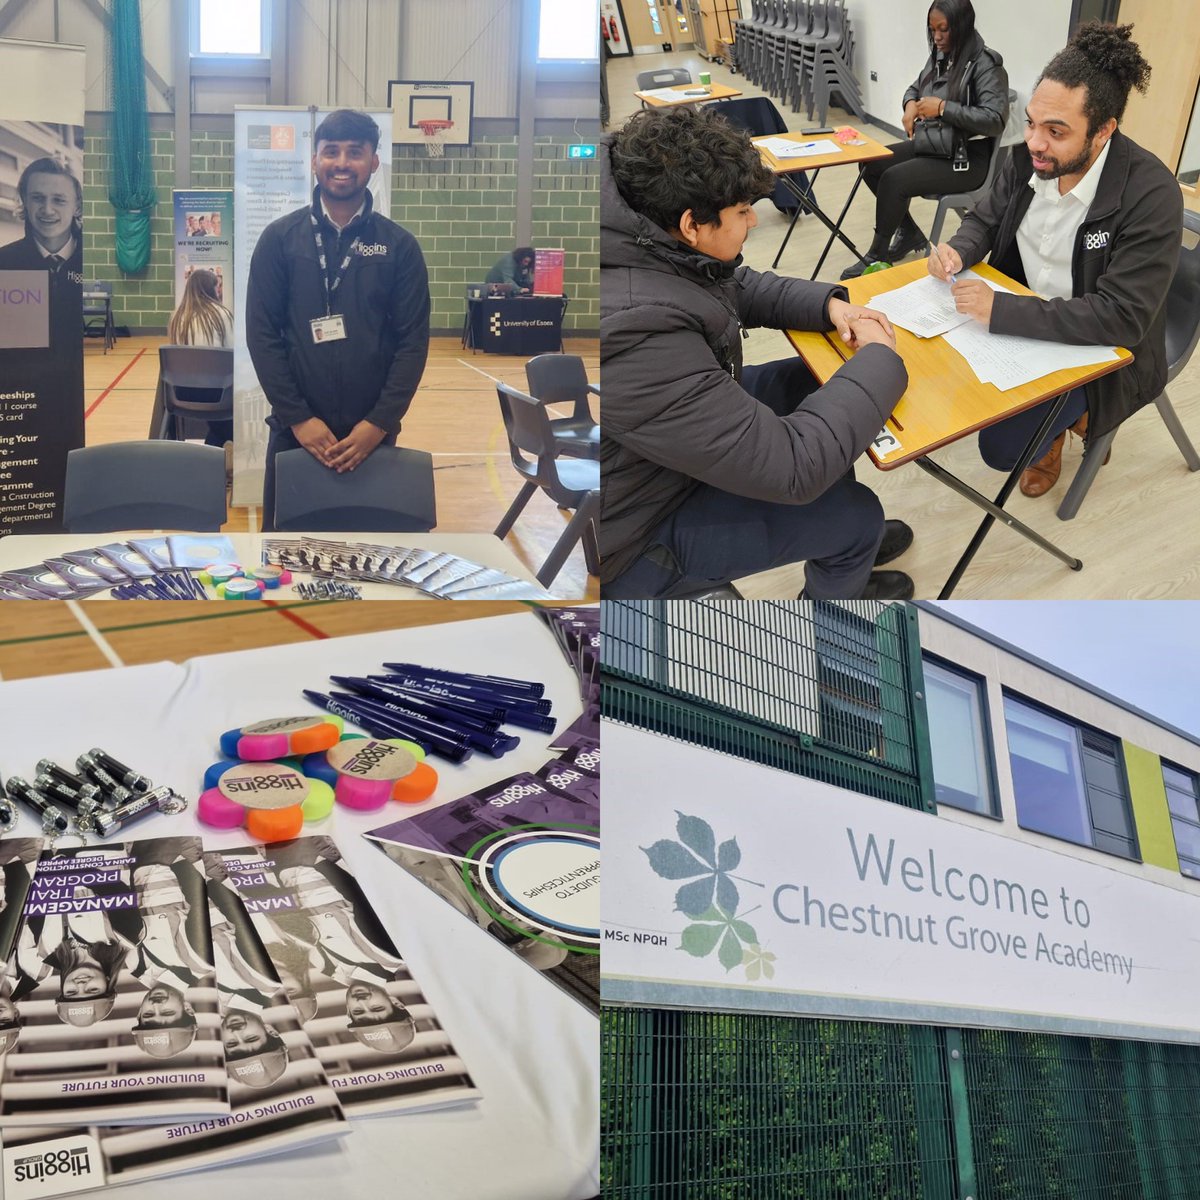 ✨Supporting the next generation into fulfilling careers✨ At @LDEUTC we recently met 125 students to help them gain confidence & learn how to express themselves in interviews. We also met students at @ChestnutGroveA to discuss our work experience & management trainee programme.